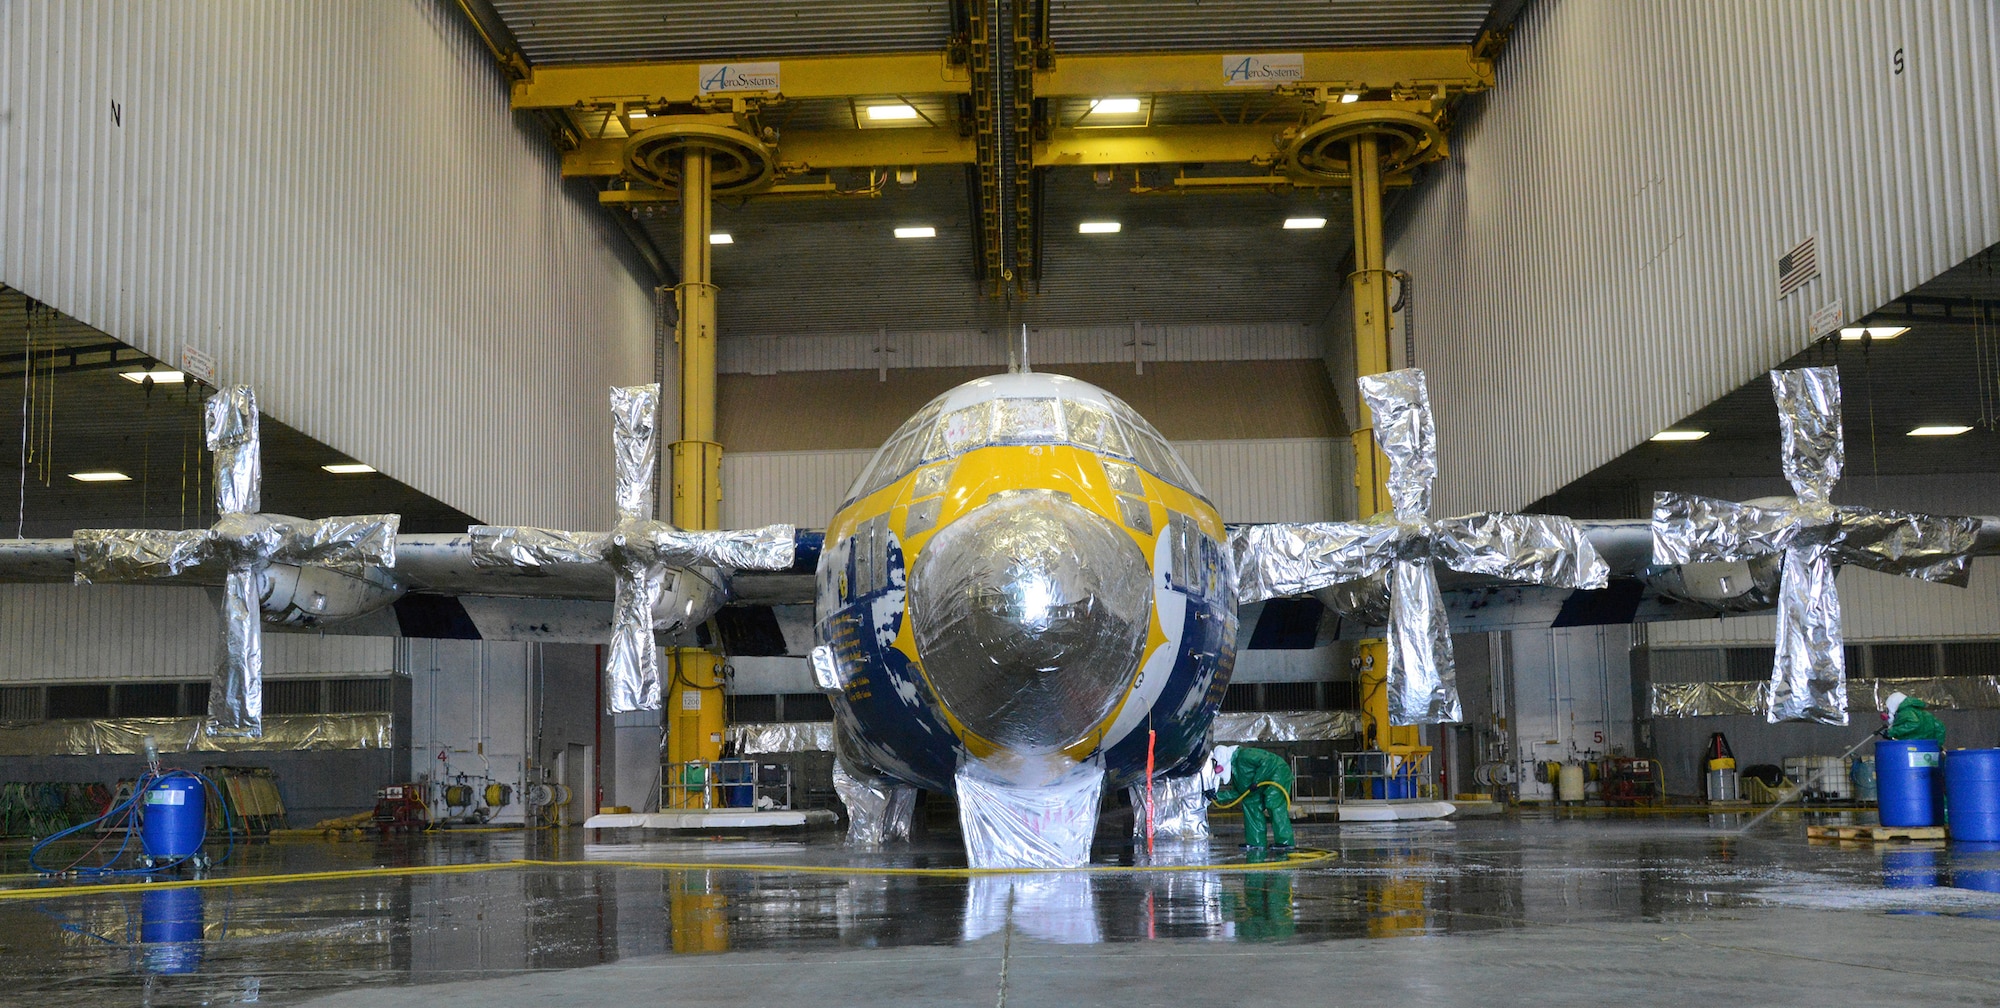 Fat Albert, the Blue Angels’ C-130 cargo plane used for transporting crew and equipment to air shows around the country, recently underwent a chemical de-paint process here after severe corrosion was found on it. Crews stripped the aircraft of all paint, using a stripping agent to remove one layer at a time. Next, Fat Albert will fly to Hill Air Force Base, Utah, for full programmed depot maintenance and paint. (Air Force photo by Kelly White)